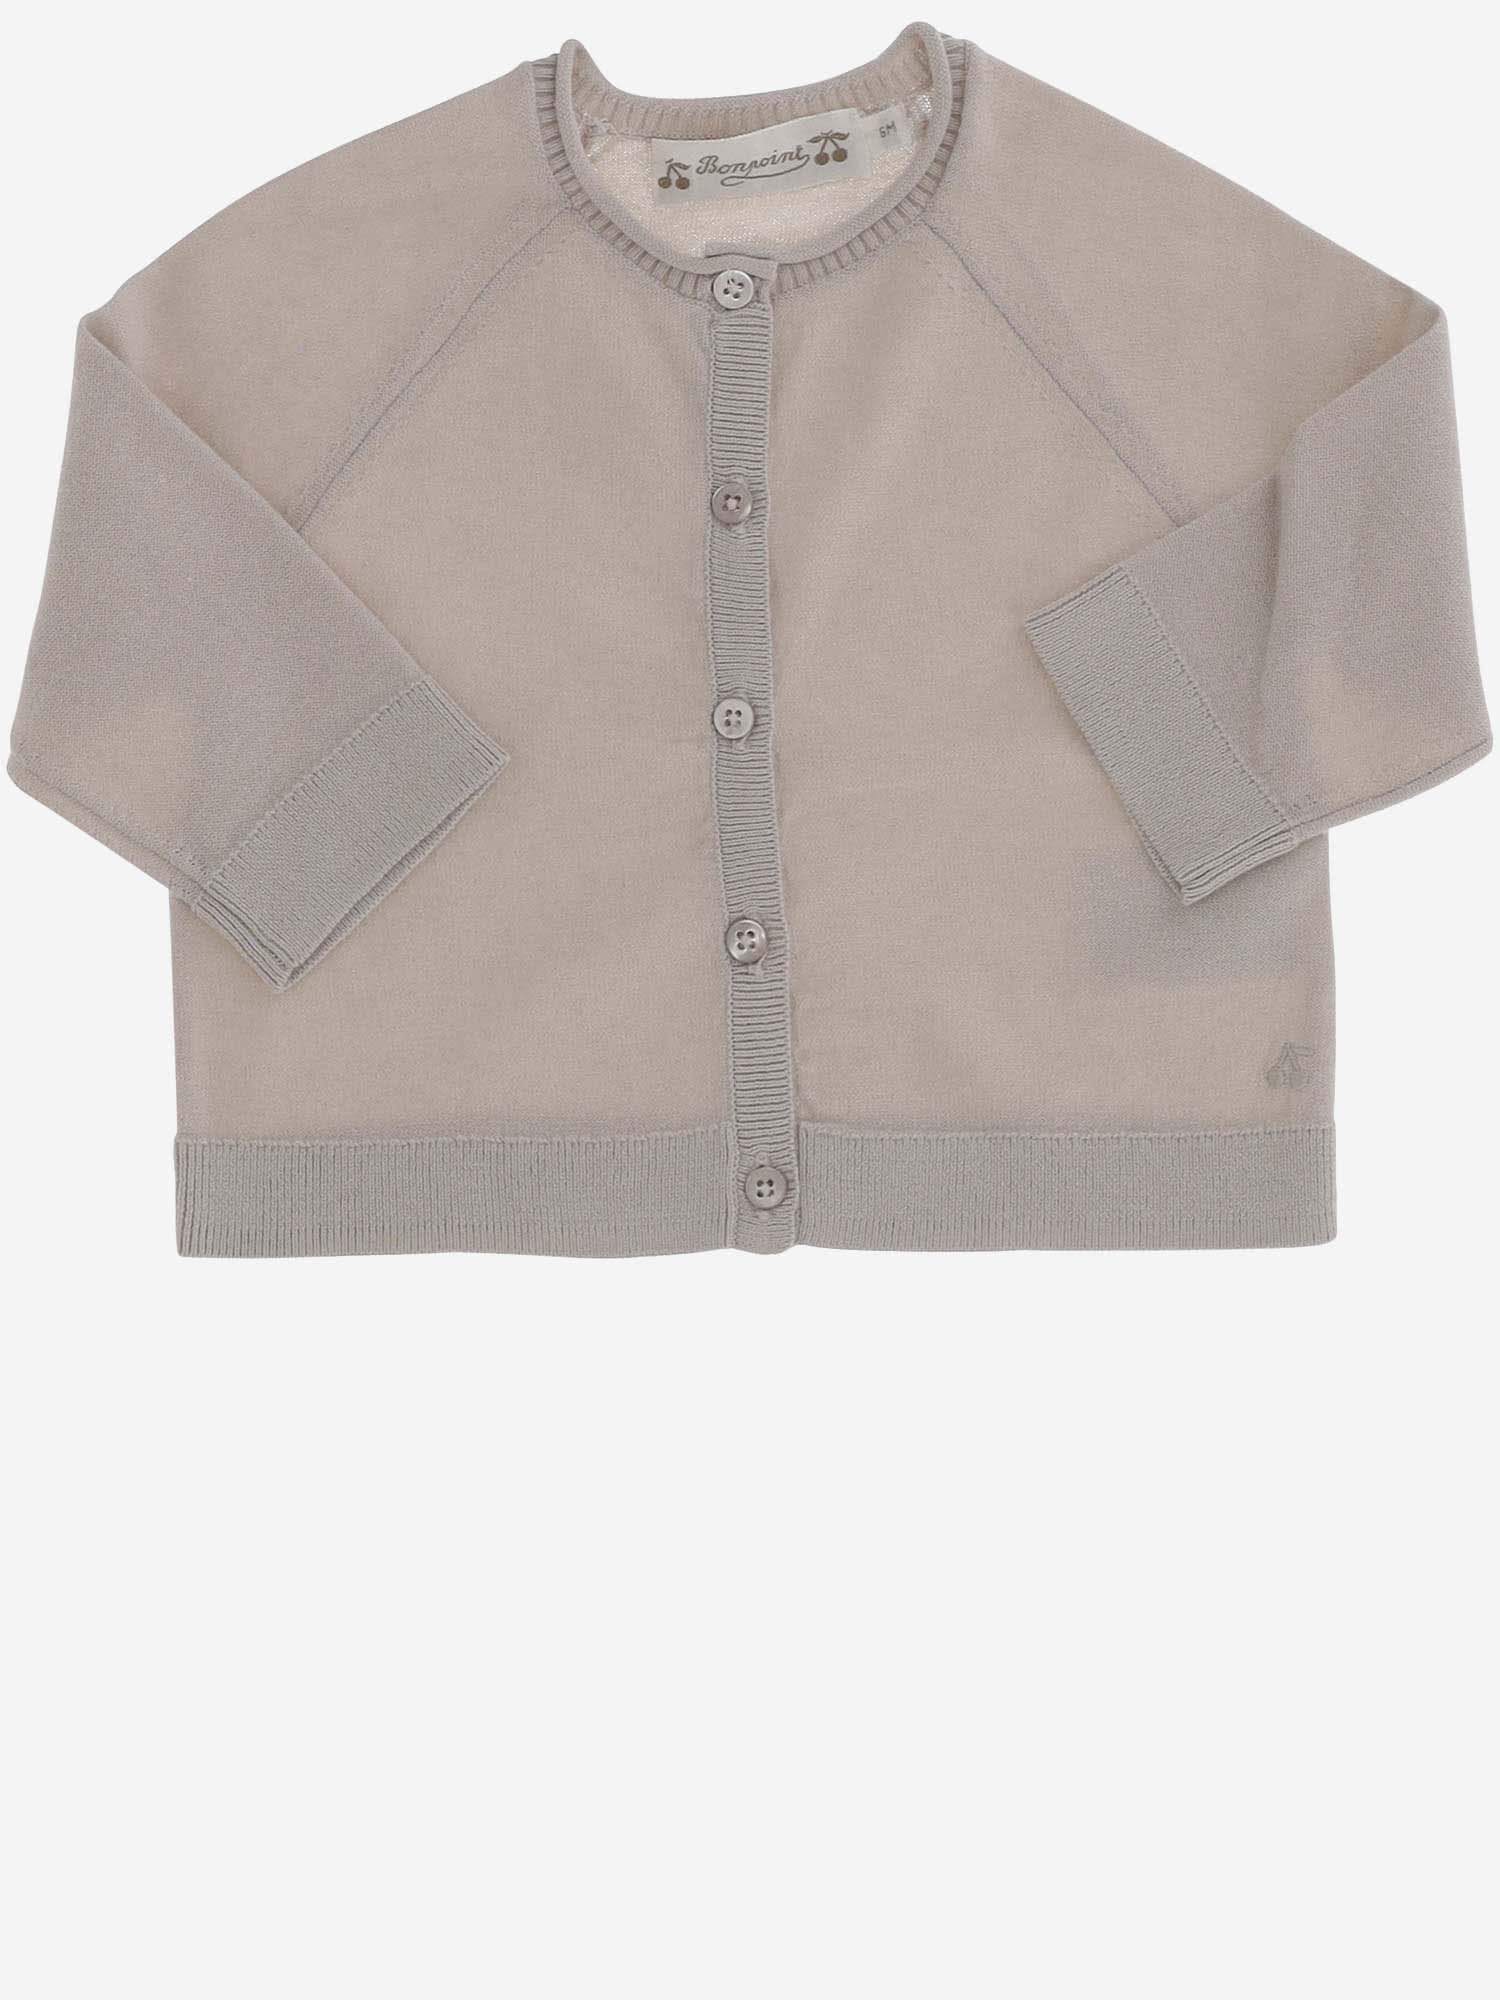 Bonpoint Babies' Cotton Cardigan In Brown